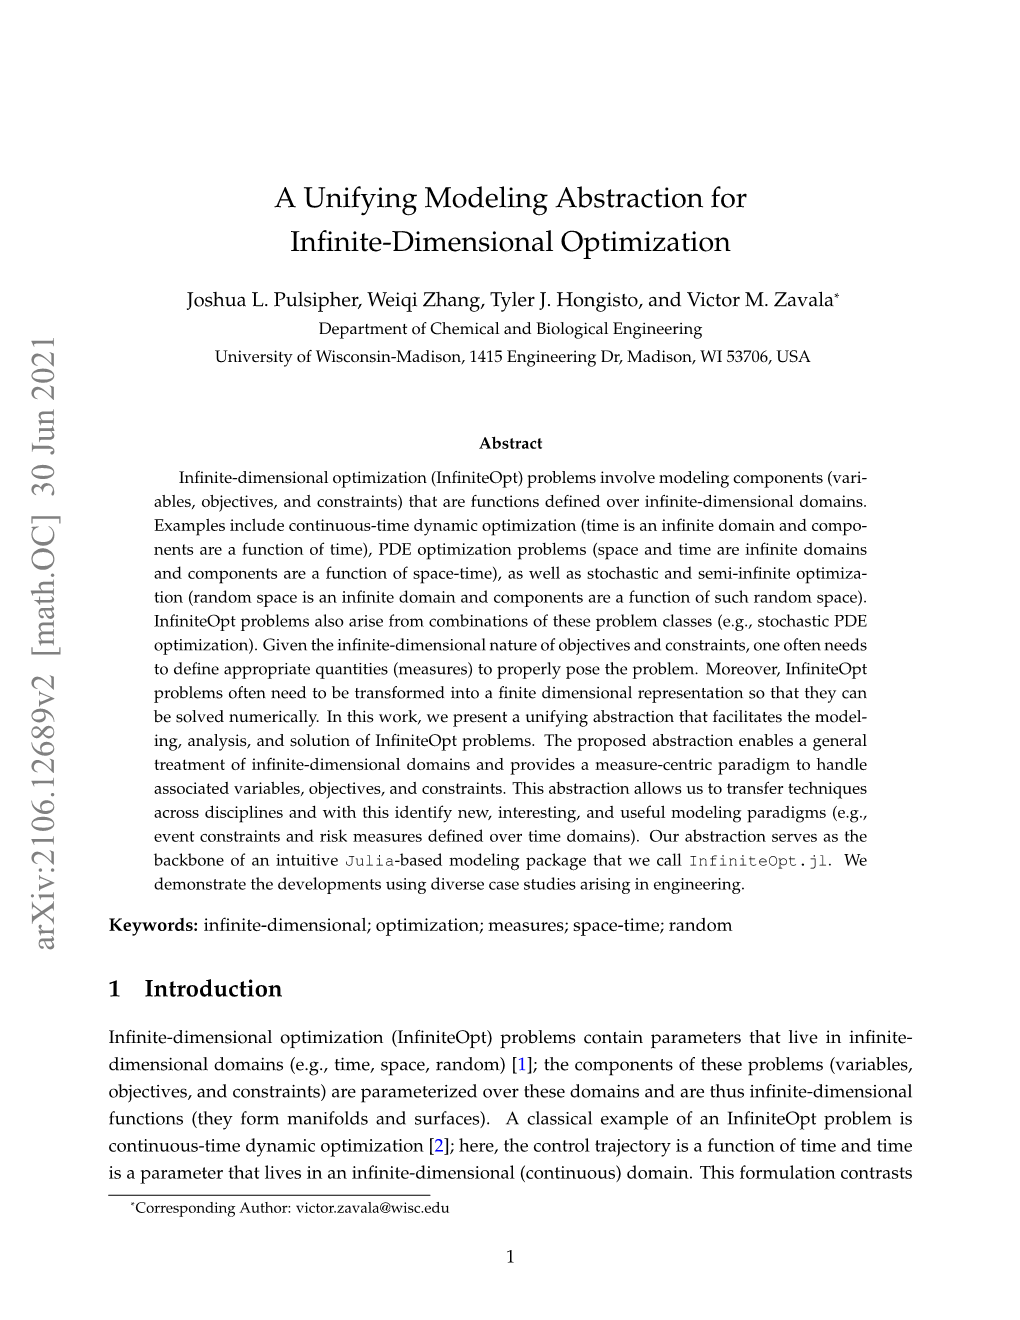 A Unifying Modeling Abstraction for Infinite-Dimensional Optimization